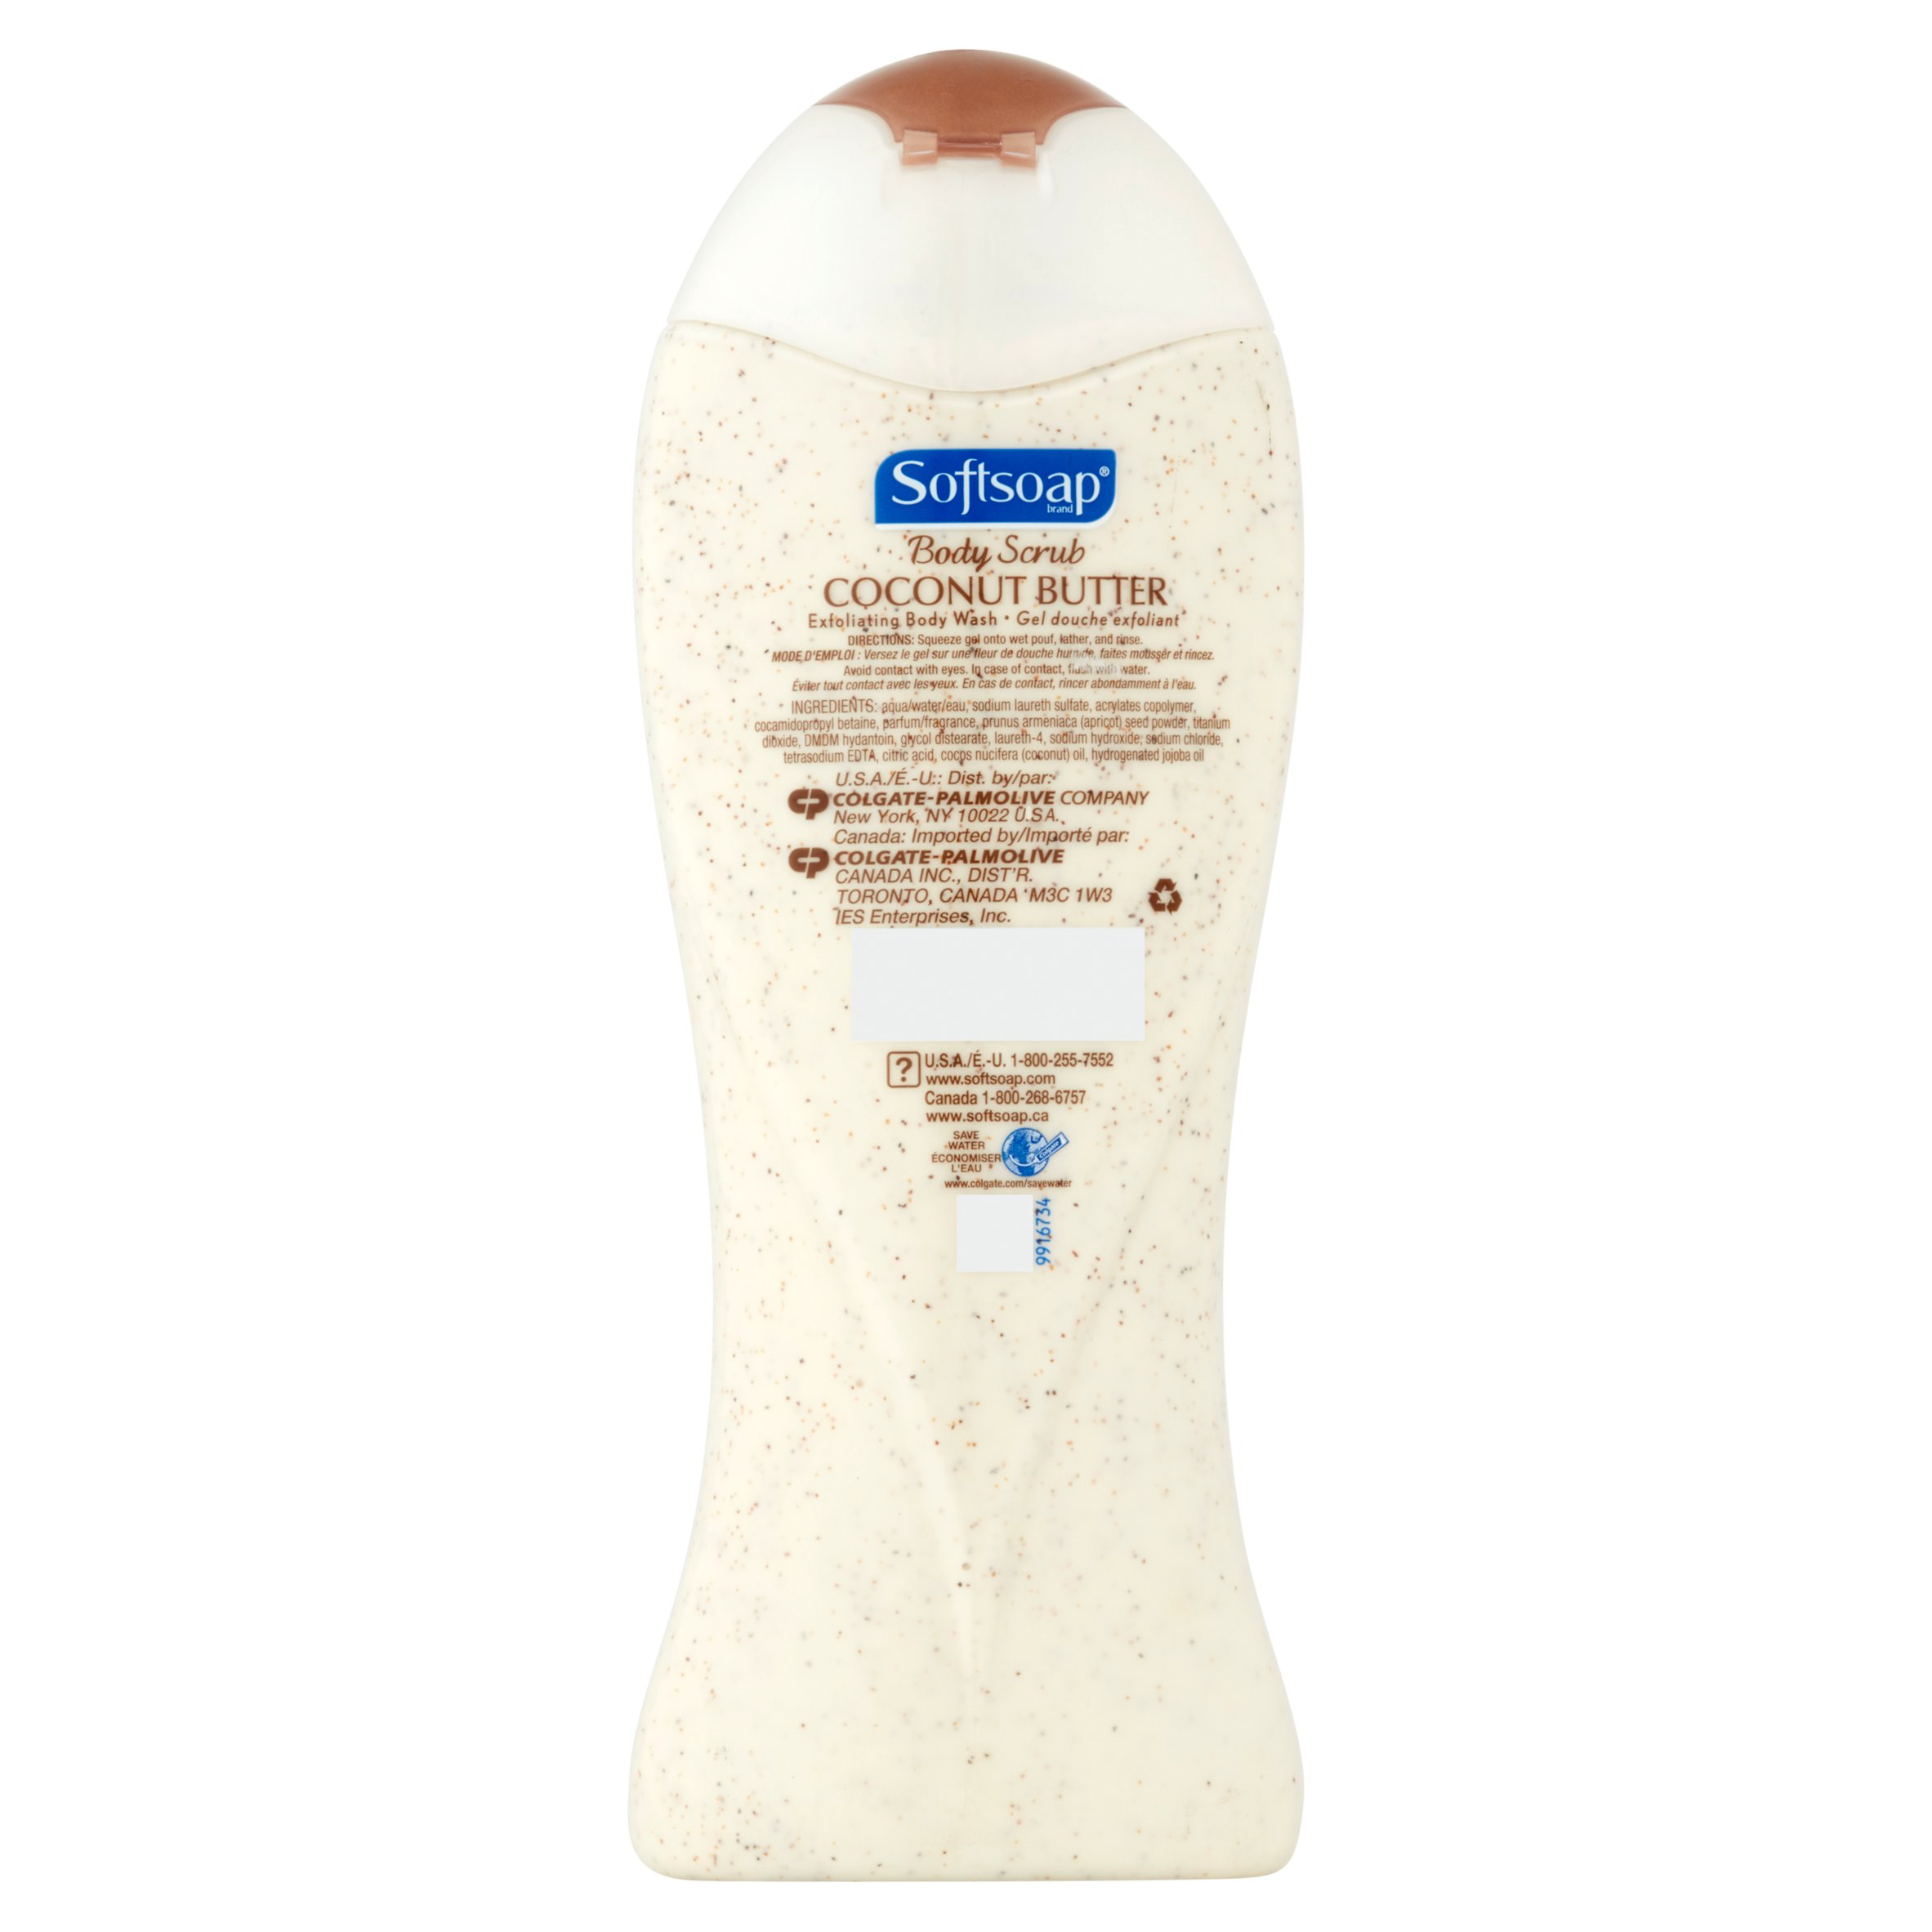 Softsoap, Coconut Butter, Exfoliating Body Wash, 15 Ounce - image 3 of 4